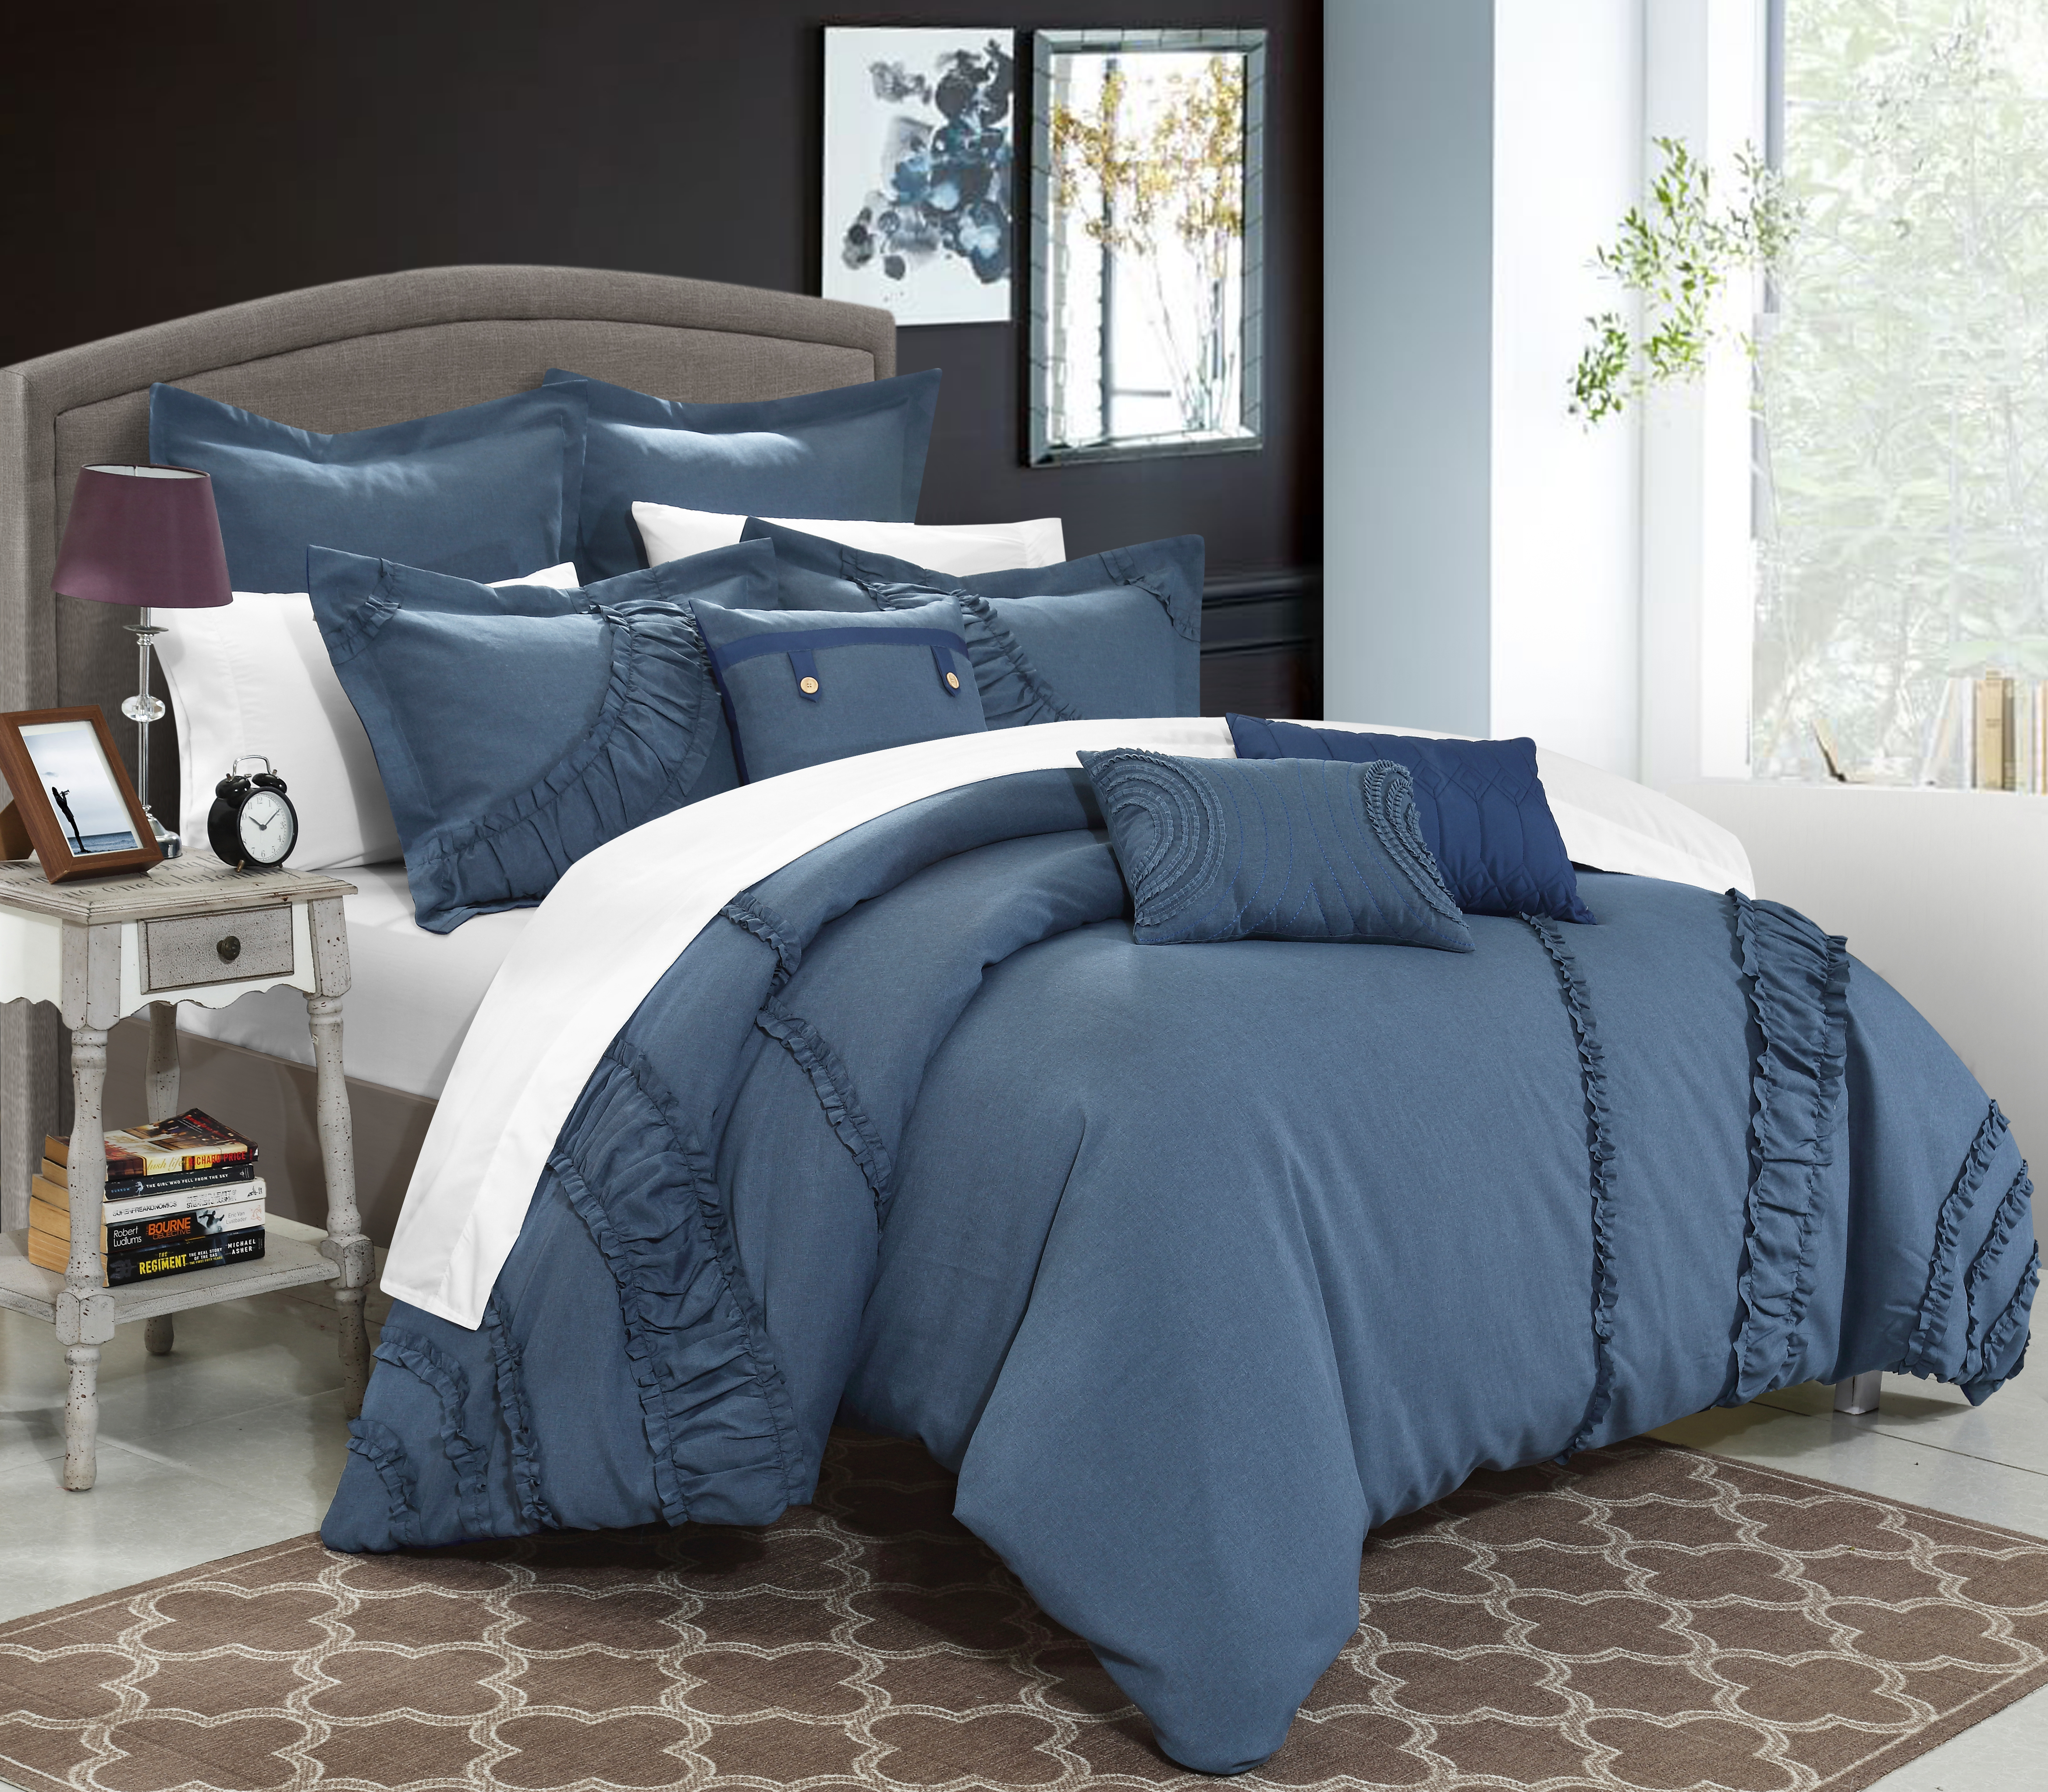 Chic Home Lunar 12 Piece FABRIC OVERSIZED AND OVERFILLED embroidered GEOMETRIC pleated ruffled color block Queen Comforter Blue